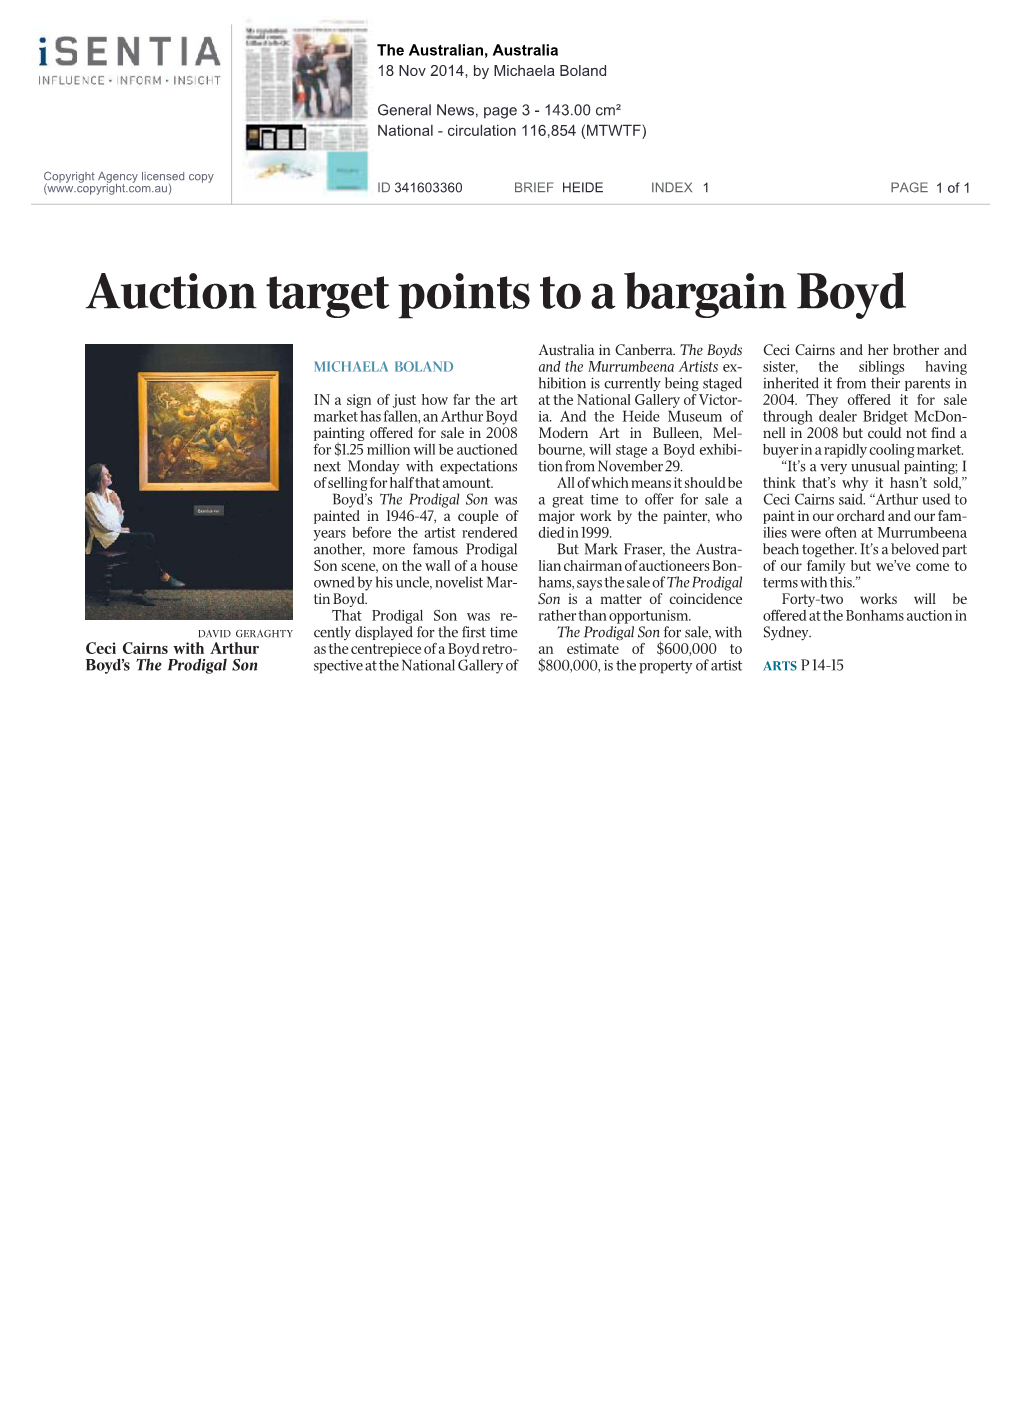 Auction Target Points to a Bargain Boyd